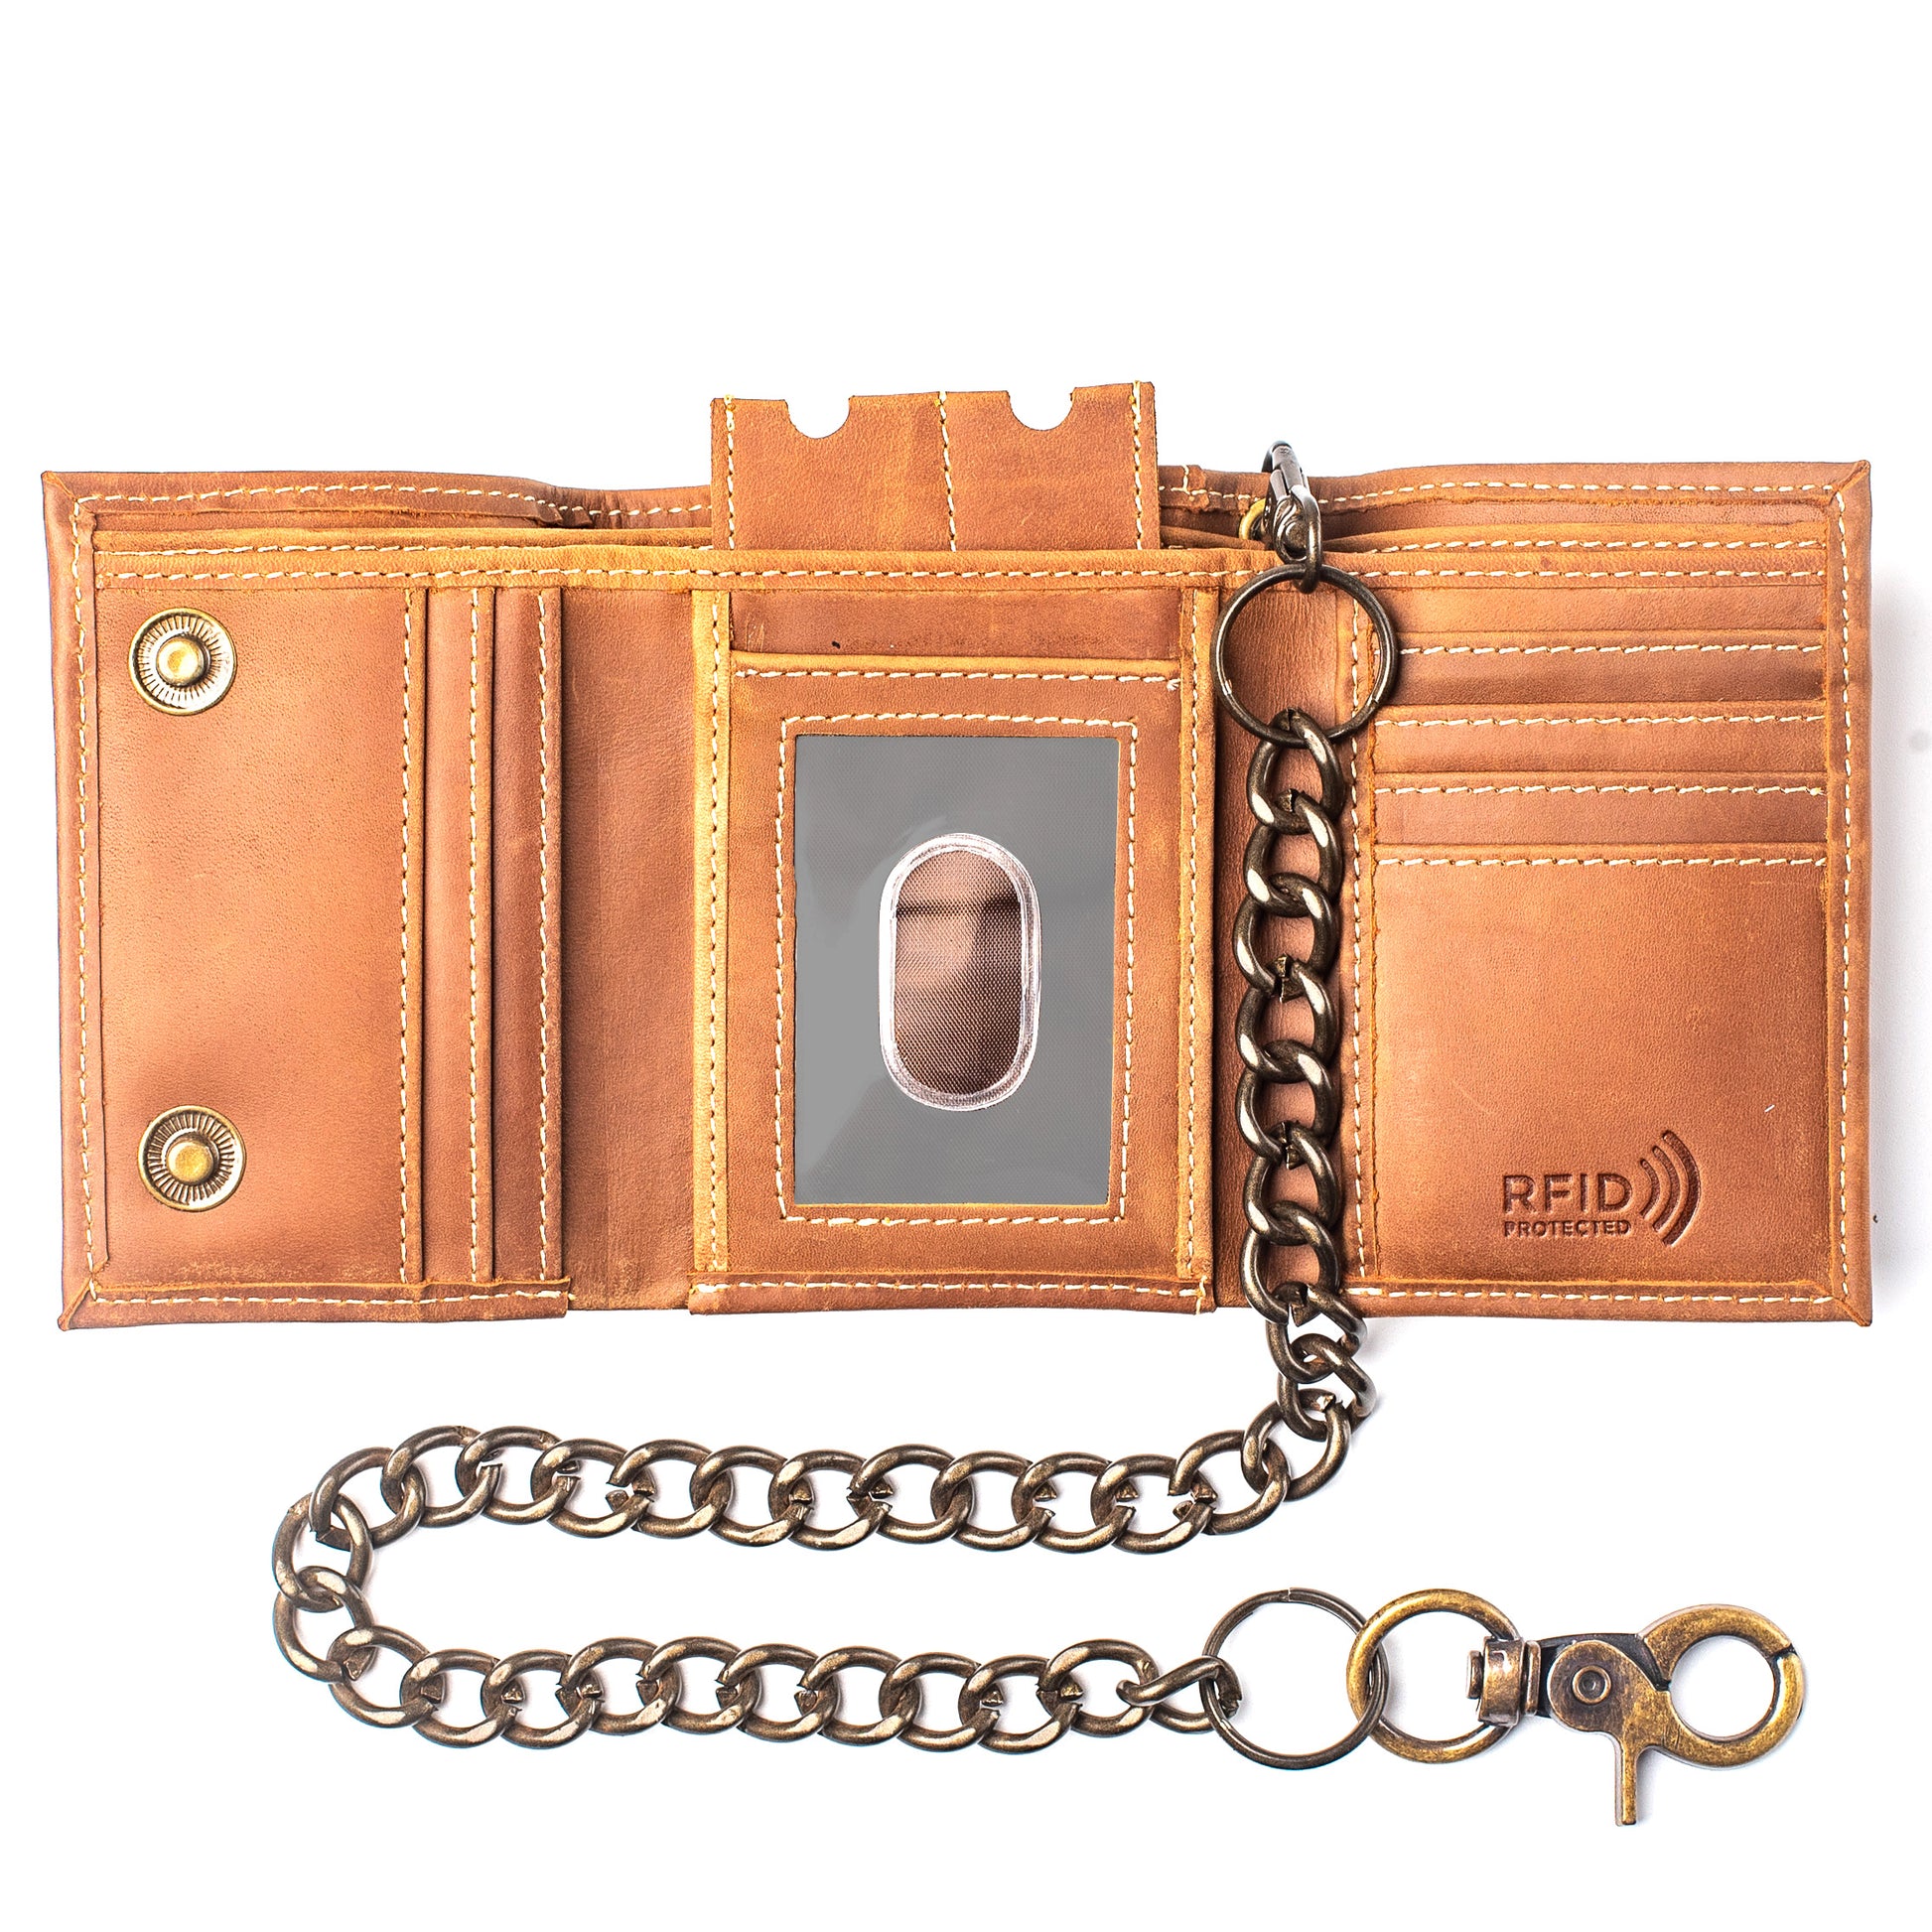 RFID-Safe Men's Leather Chain Wallet 18 | Trifold Biker Style